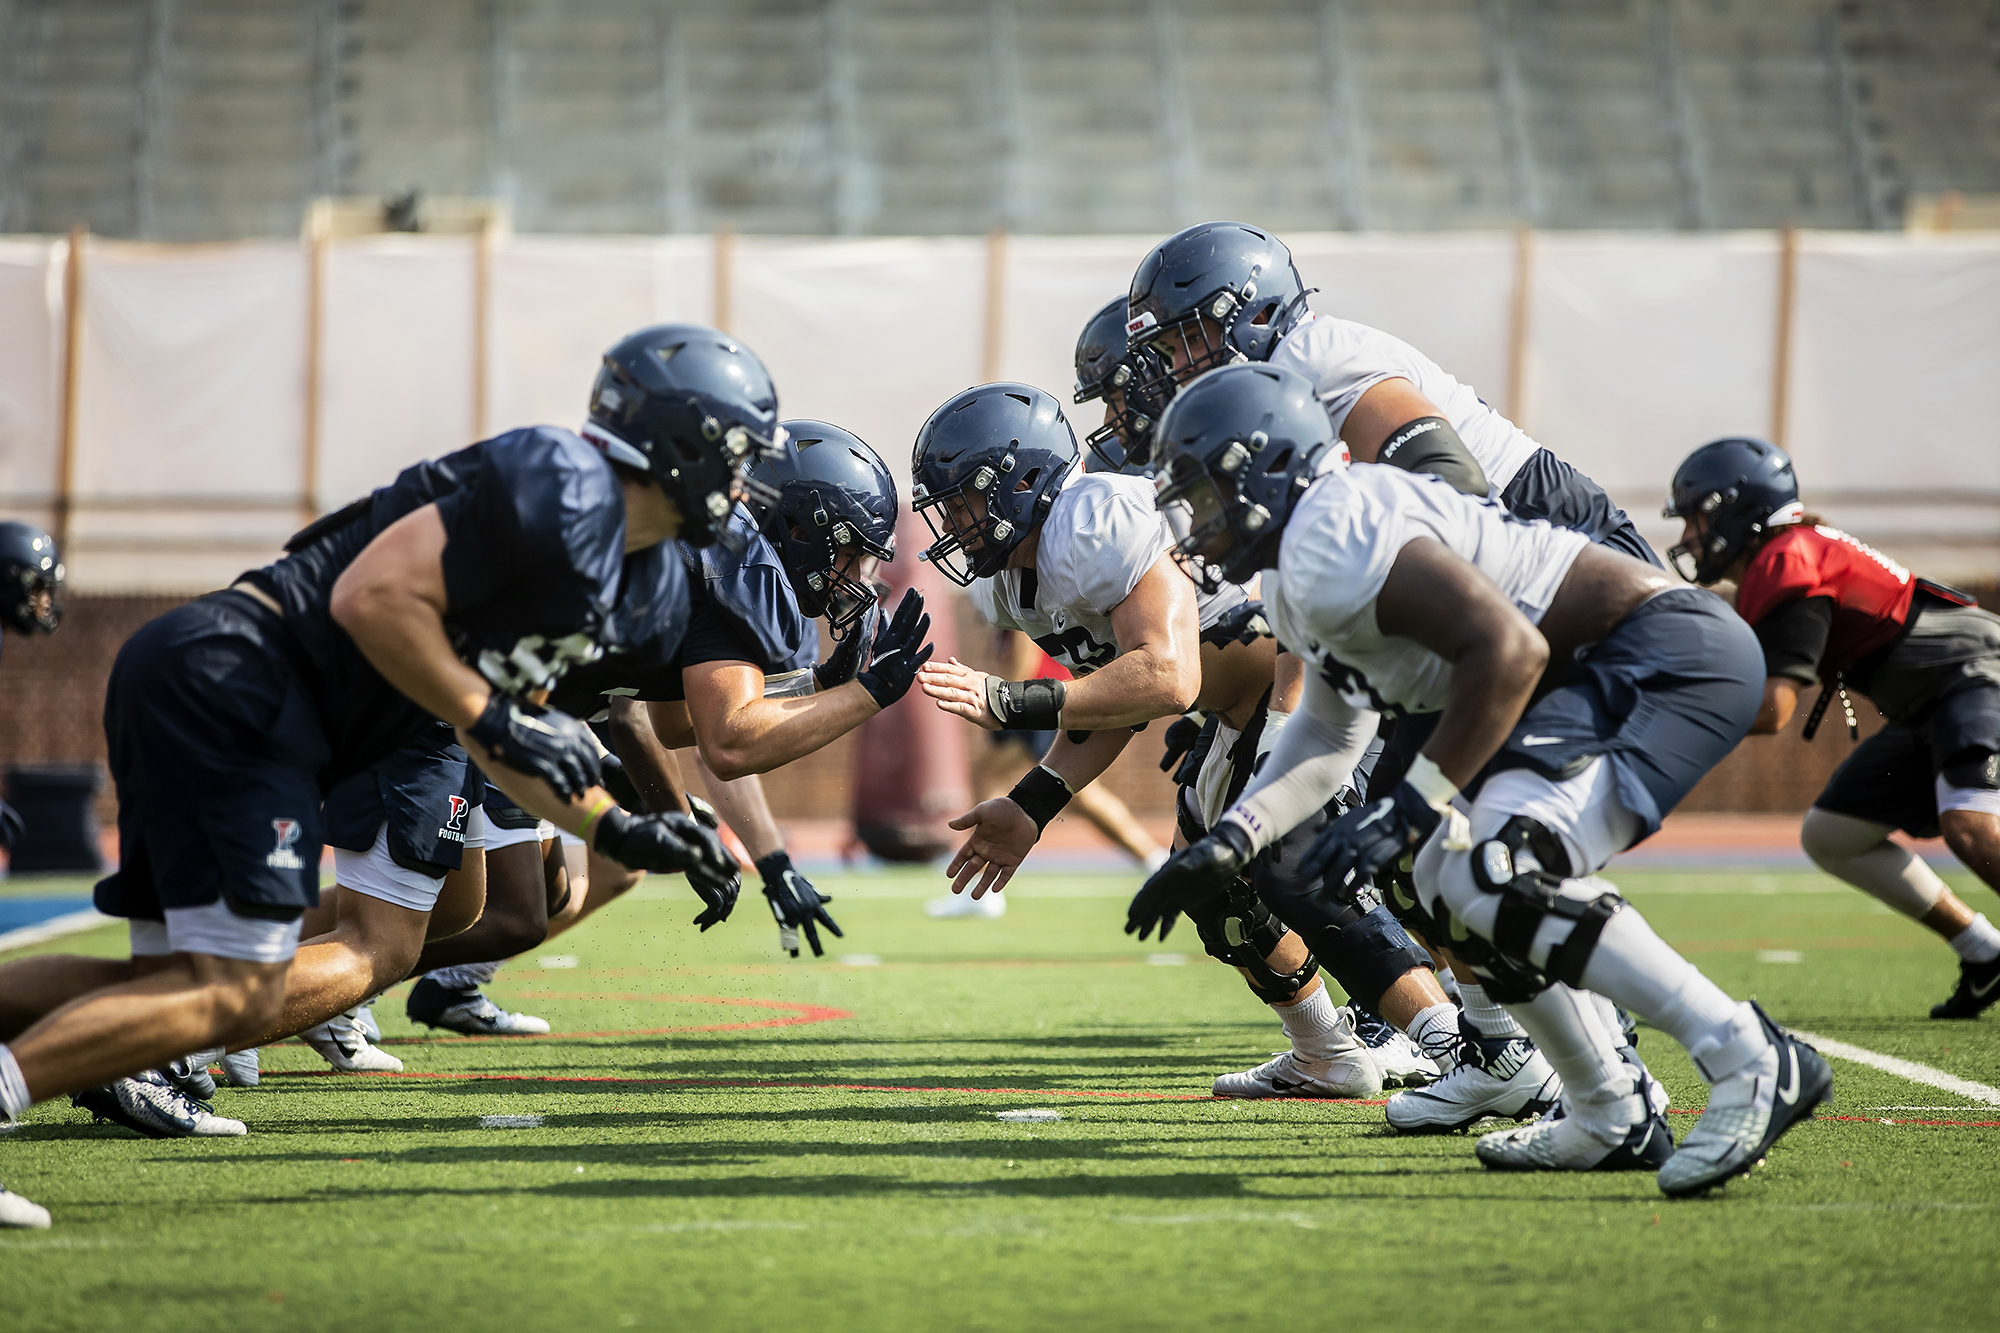 Offensive linemen and defensive linemen battle at the line of scrimmage.